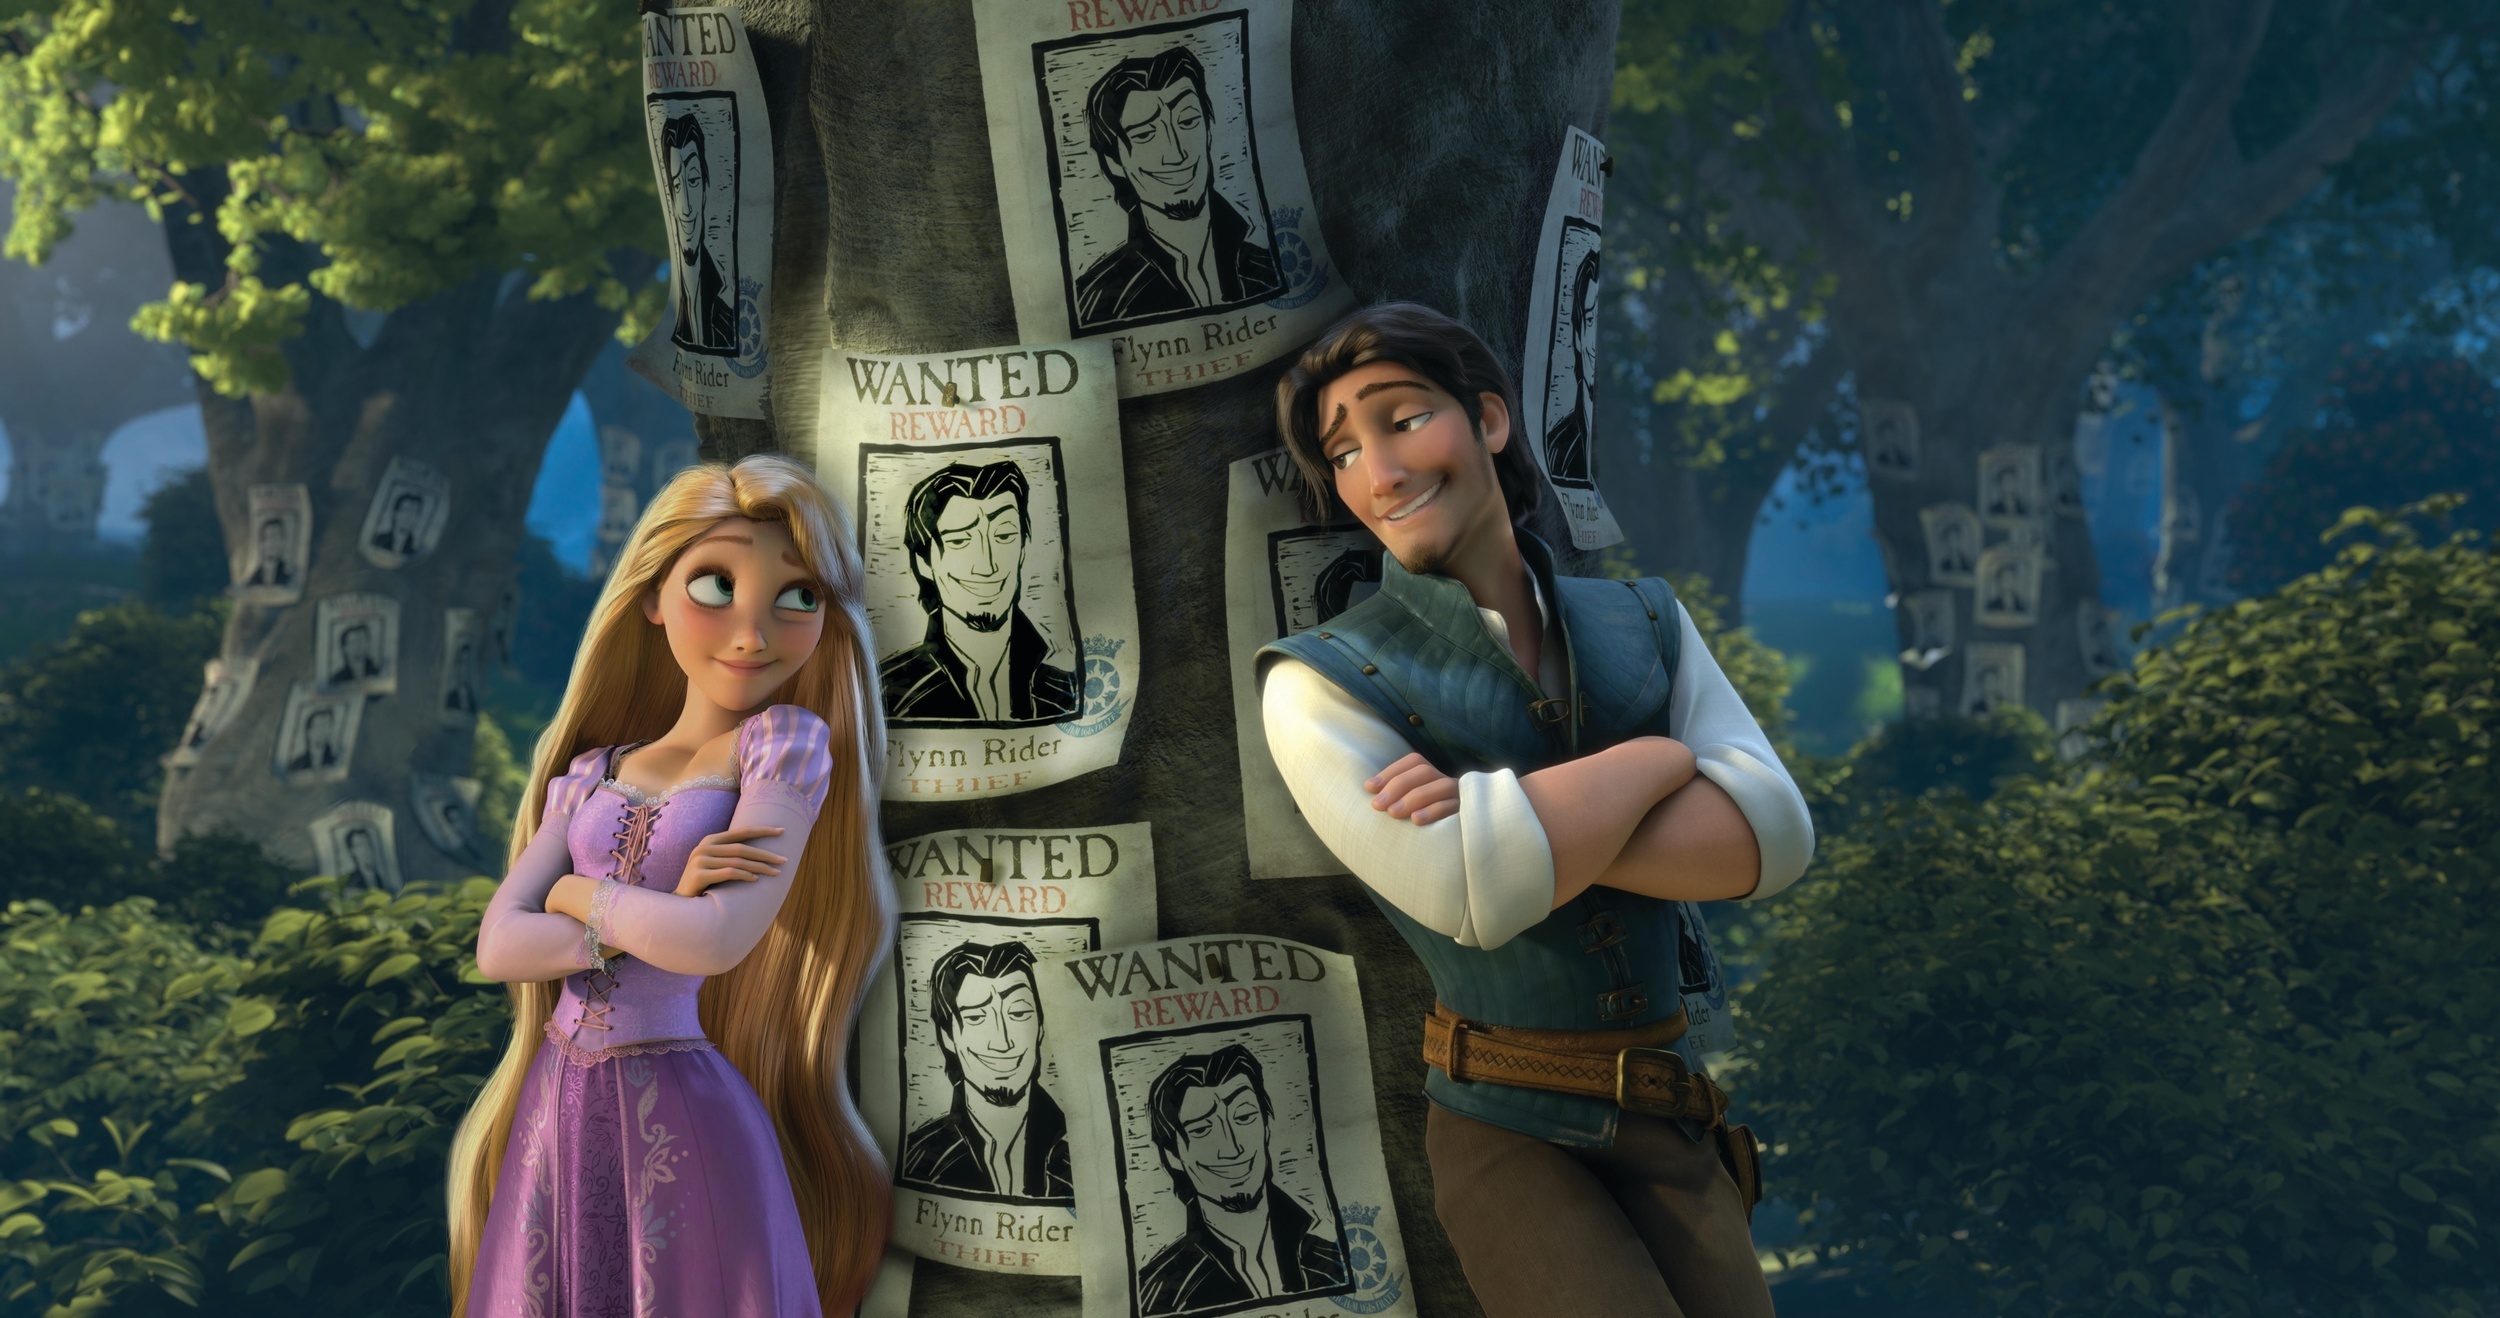 <p>Disney’s <em>Tangled</em> was a fraught production, leading to worries it would end up a disaster and a box-office fiasco. It ended up being a big hit that spawned multiple TV shows. The film begins not with Rapunzel but with Flynn Rider giving a voiceover that starts with, “This is the story of how I died.” He follows that with, “Don’t worry, this is actually a very fun story,” but that still grabs you.</p><p>You may also like: <a href='https://www.yardbarker.com/entertainment/articles/the_20_most_forgettable_comic_book_movies_100323/s1__26722034'>The 20 most forgettable comic book movies</a></p>